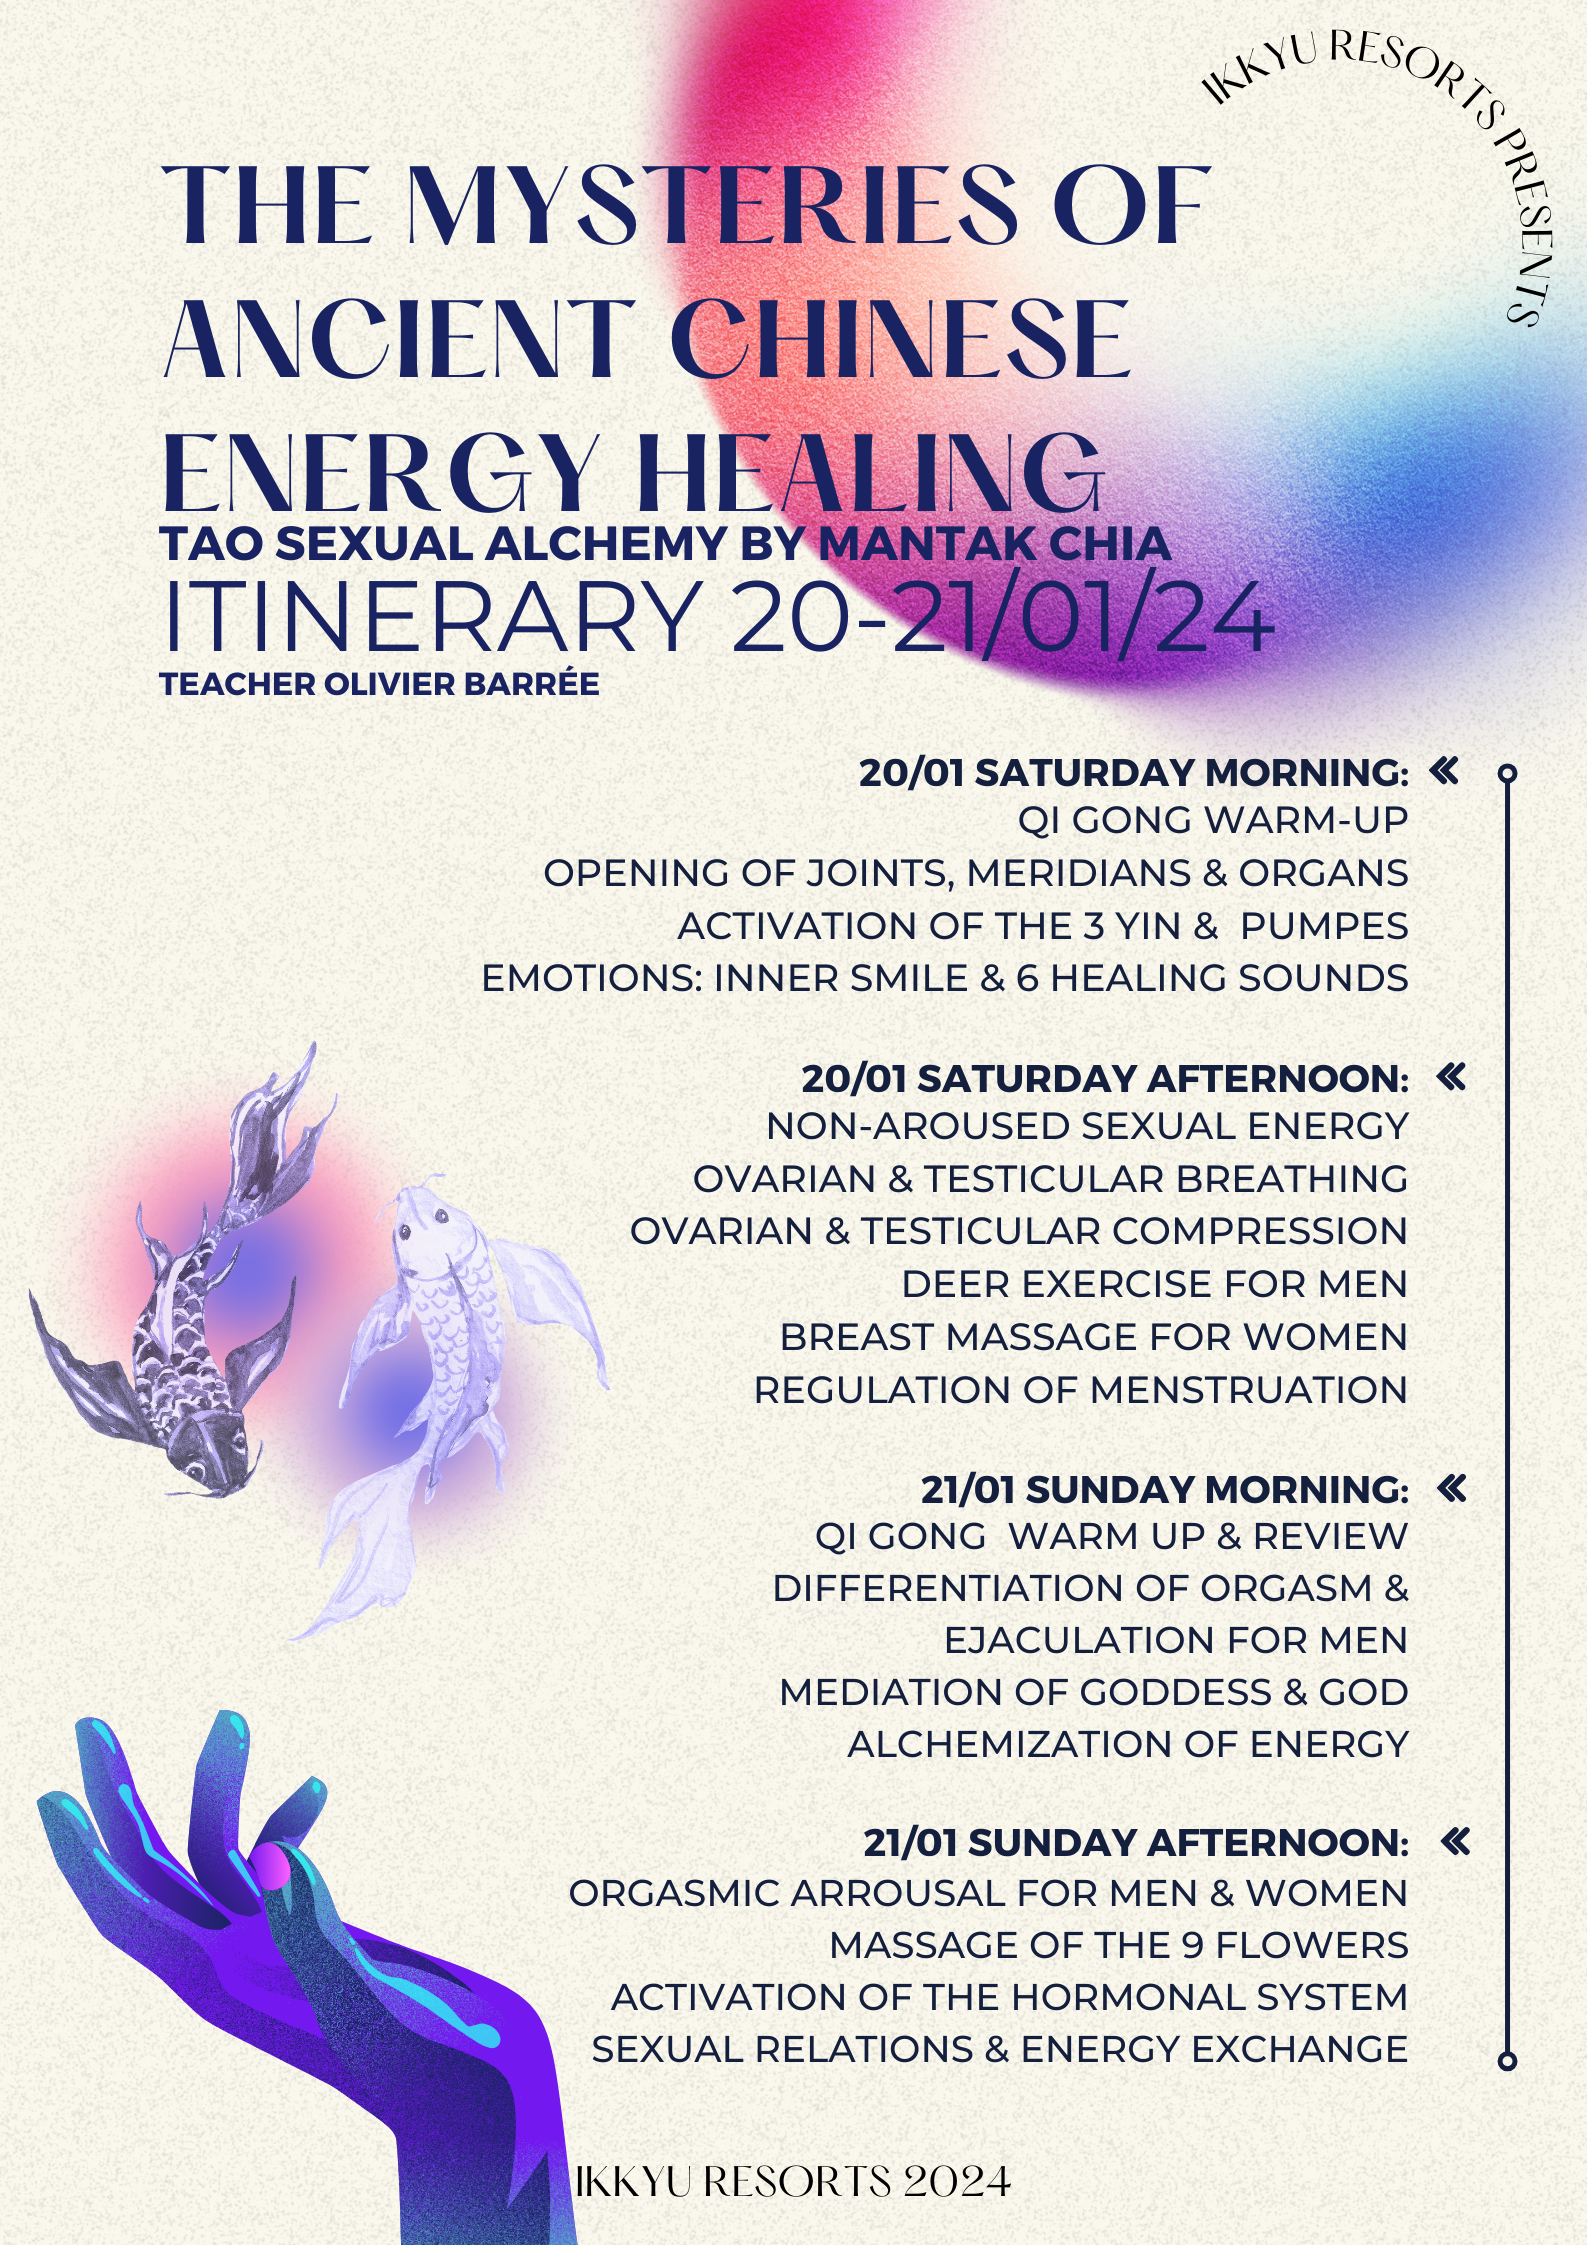 Itinerary 2024 The Mysteries of Ancient Chinese Energy Healing (1)